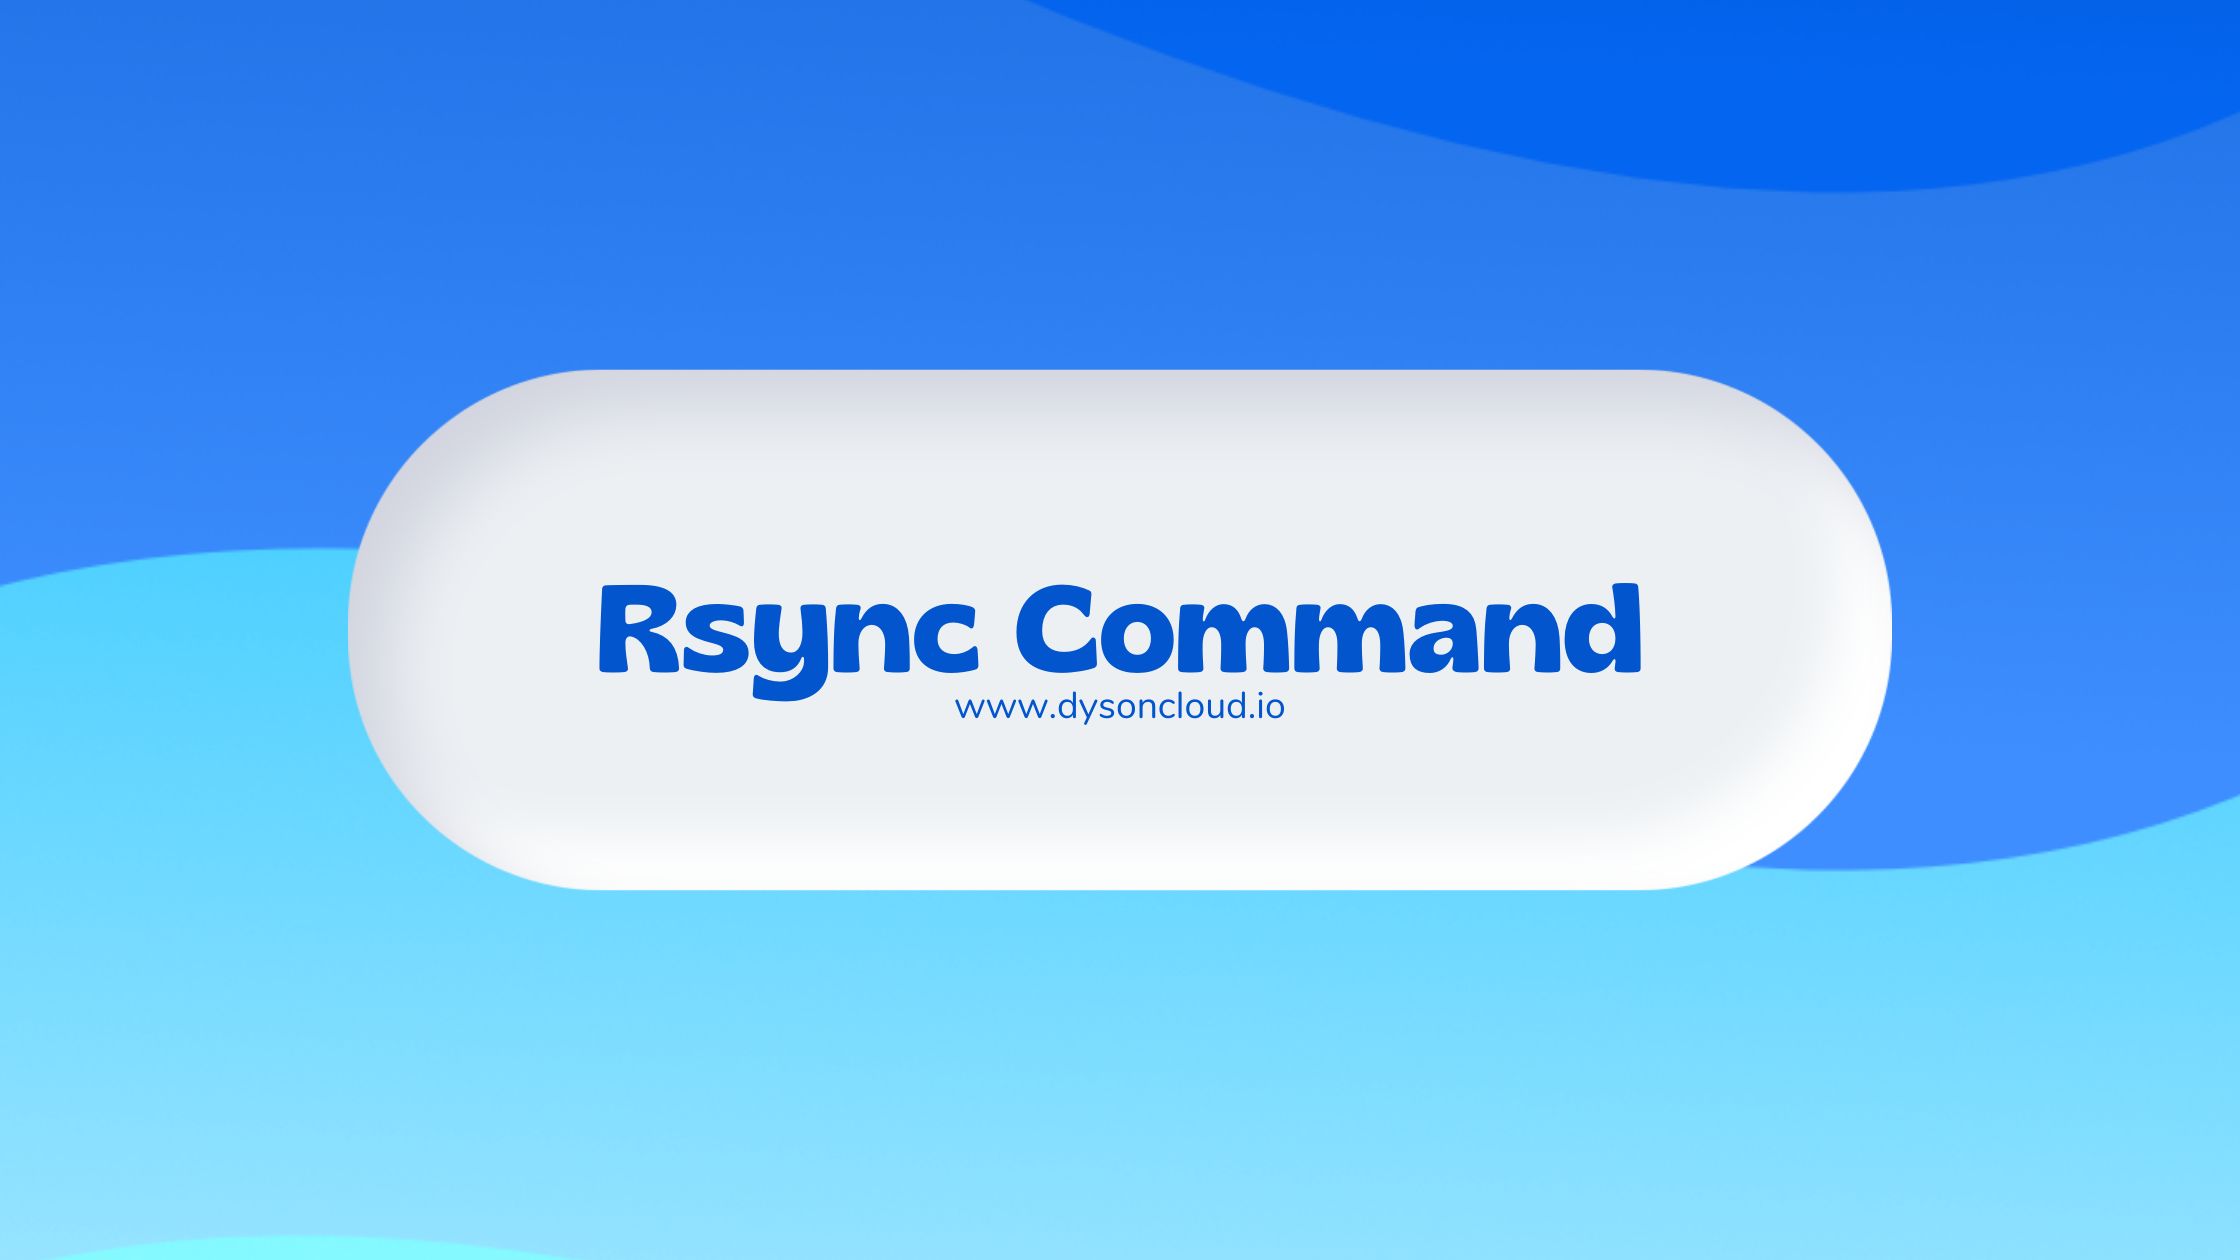 Using the rsync Command in Linux